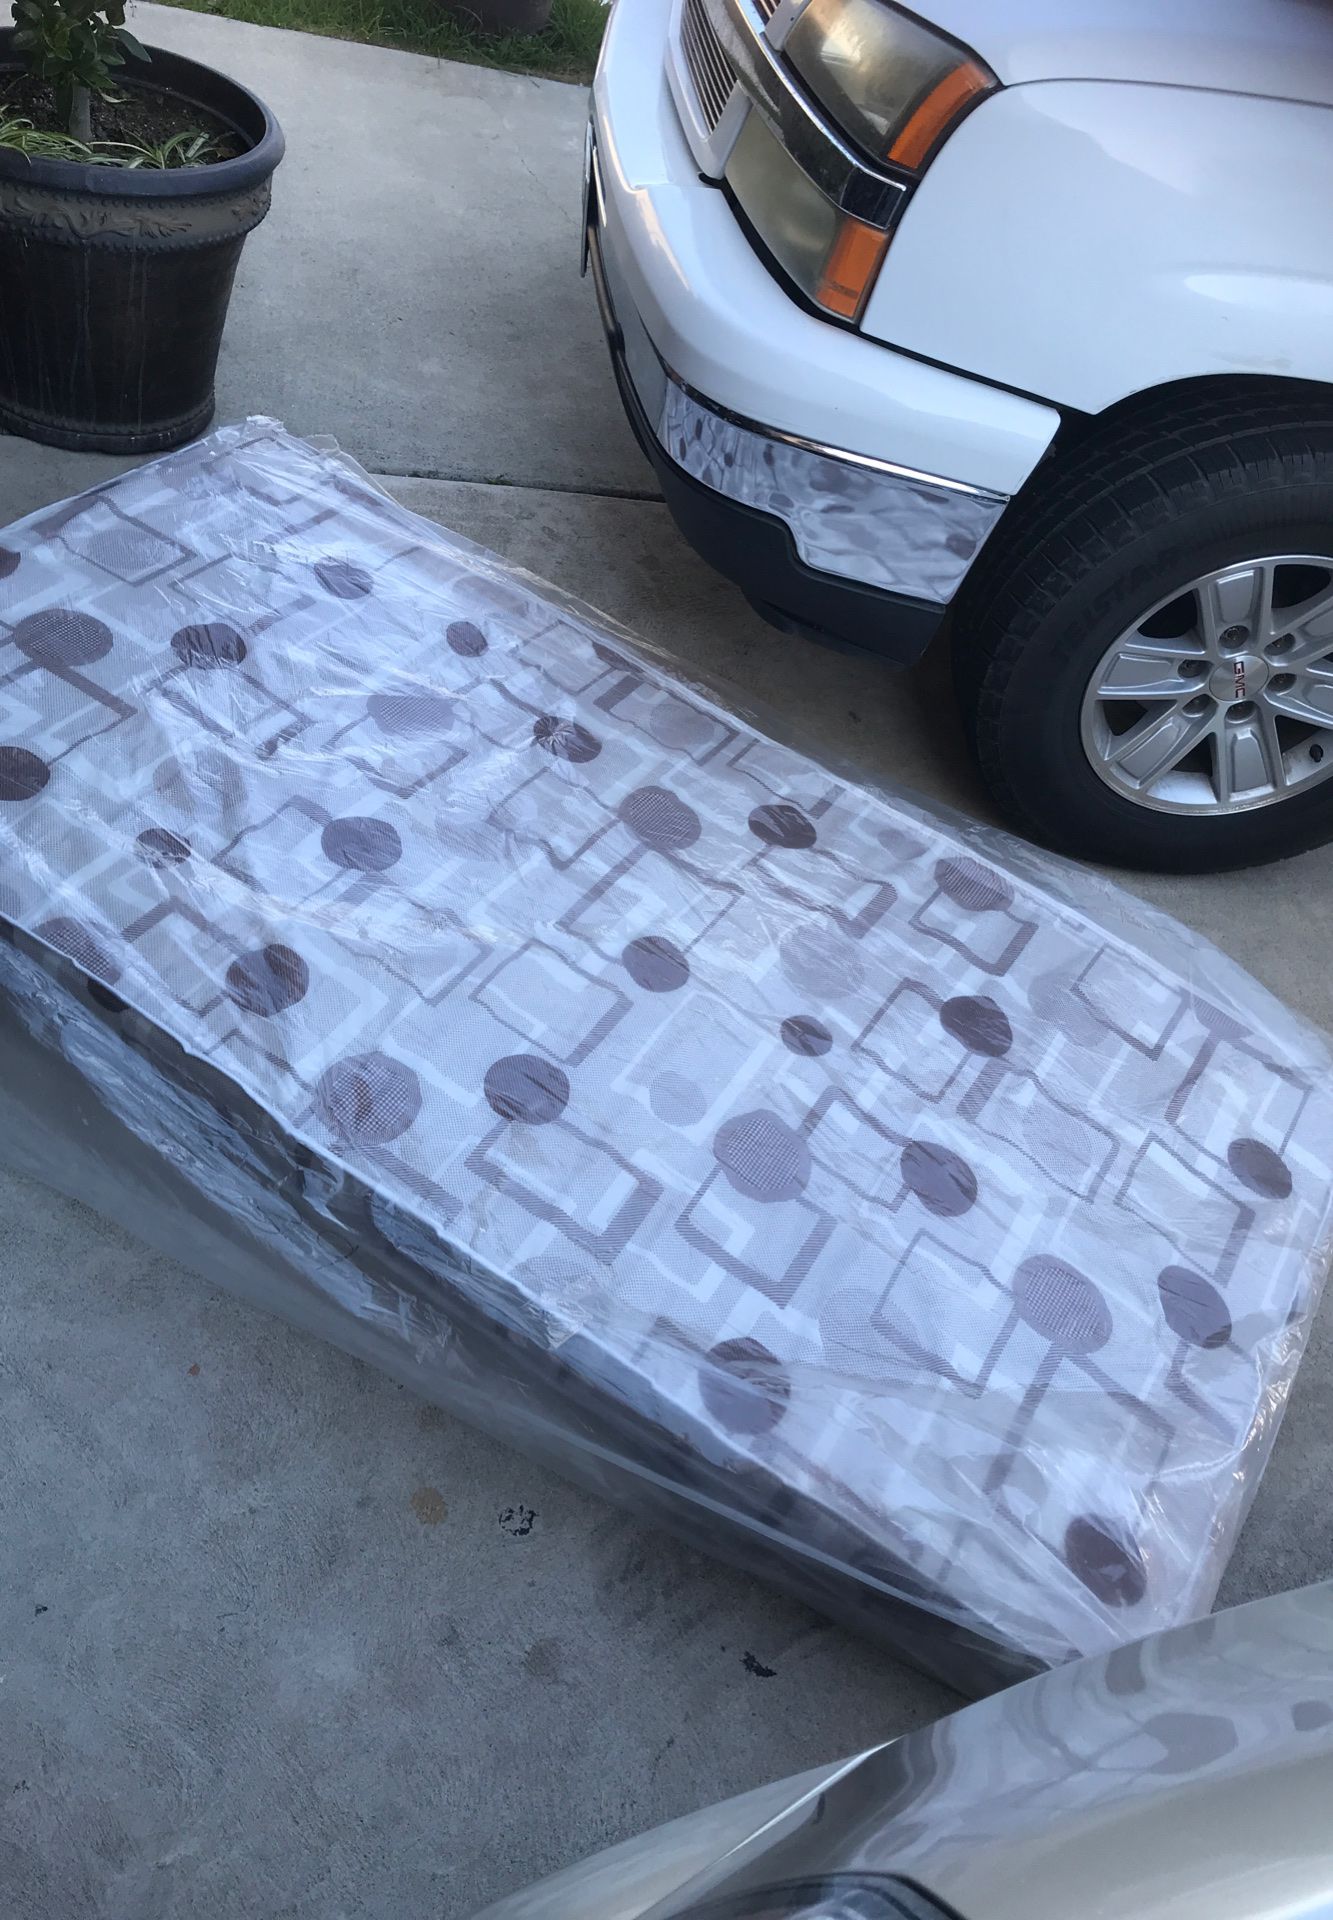 FREE twin size mattress really good condition still wrapped in plastic bag.